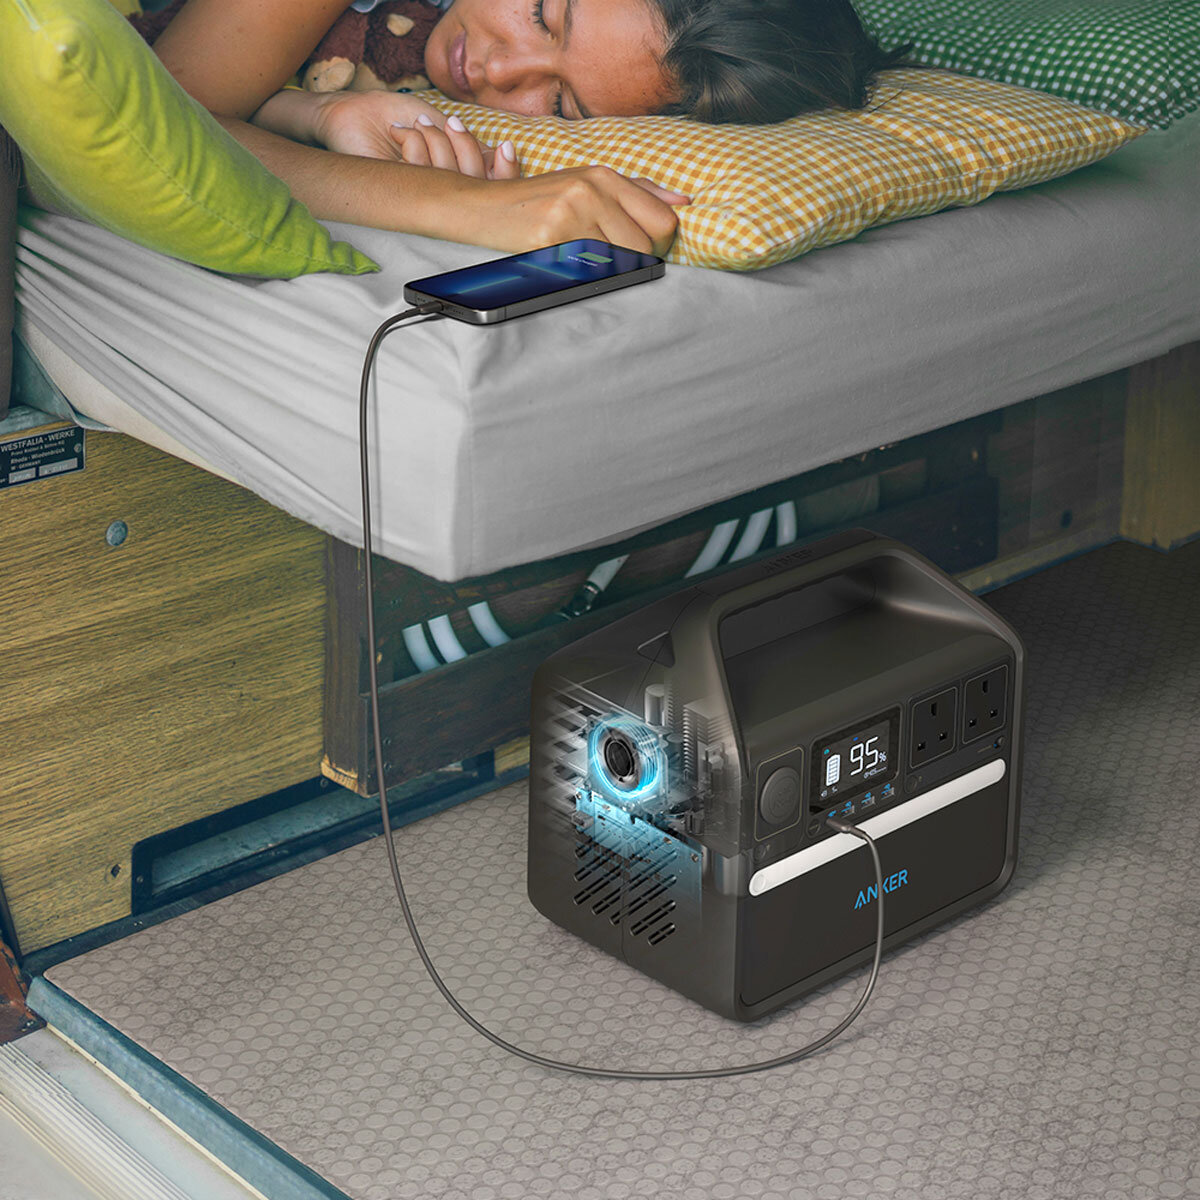 Lifestyle image showing quiet charge system